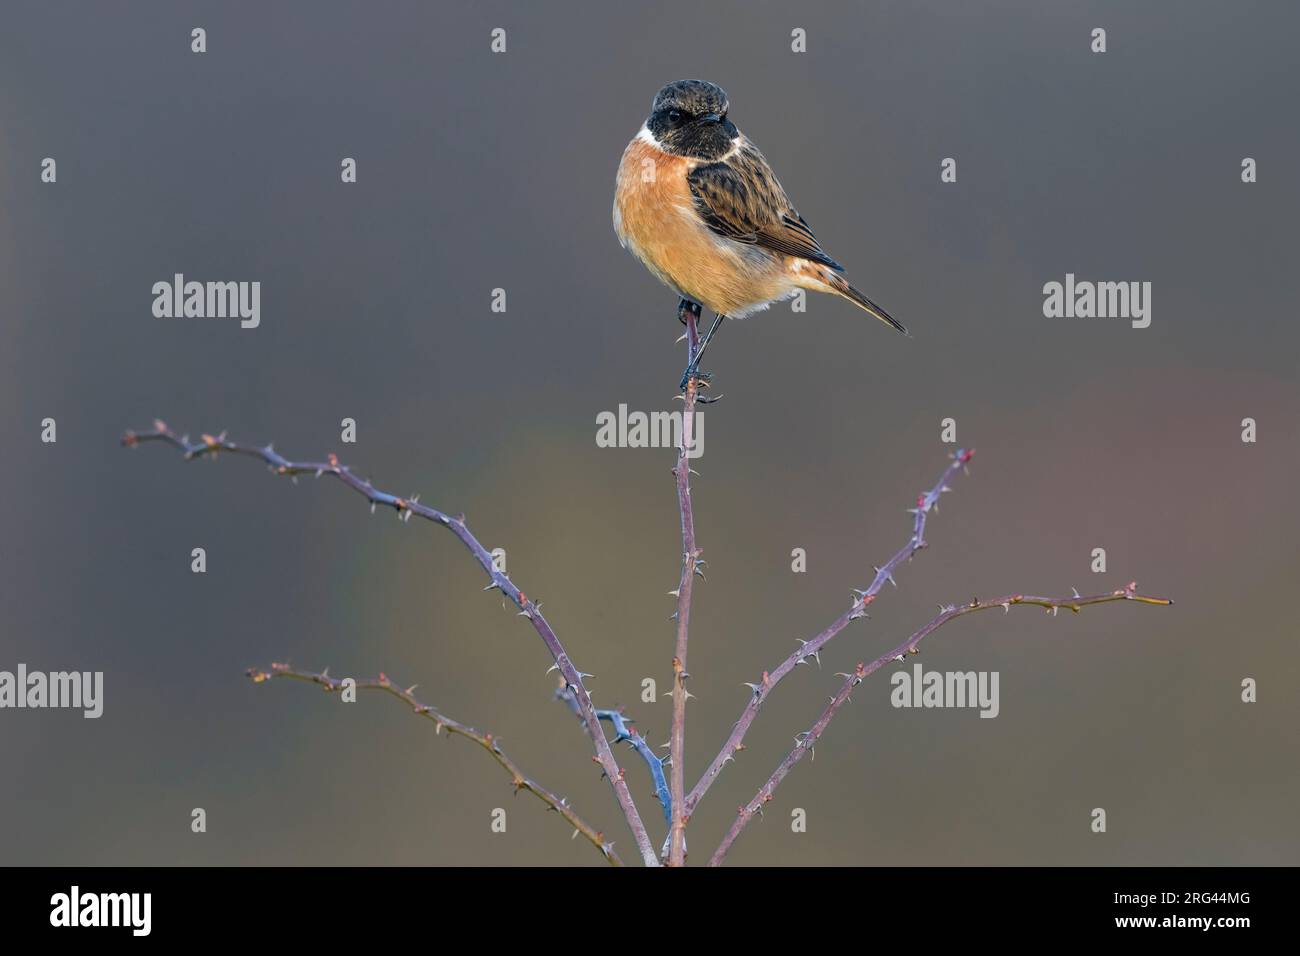 Wintering male European Stonechat (Saxicola rubicola) in Italy. Perched in low vegetation. Stock Photo